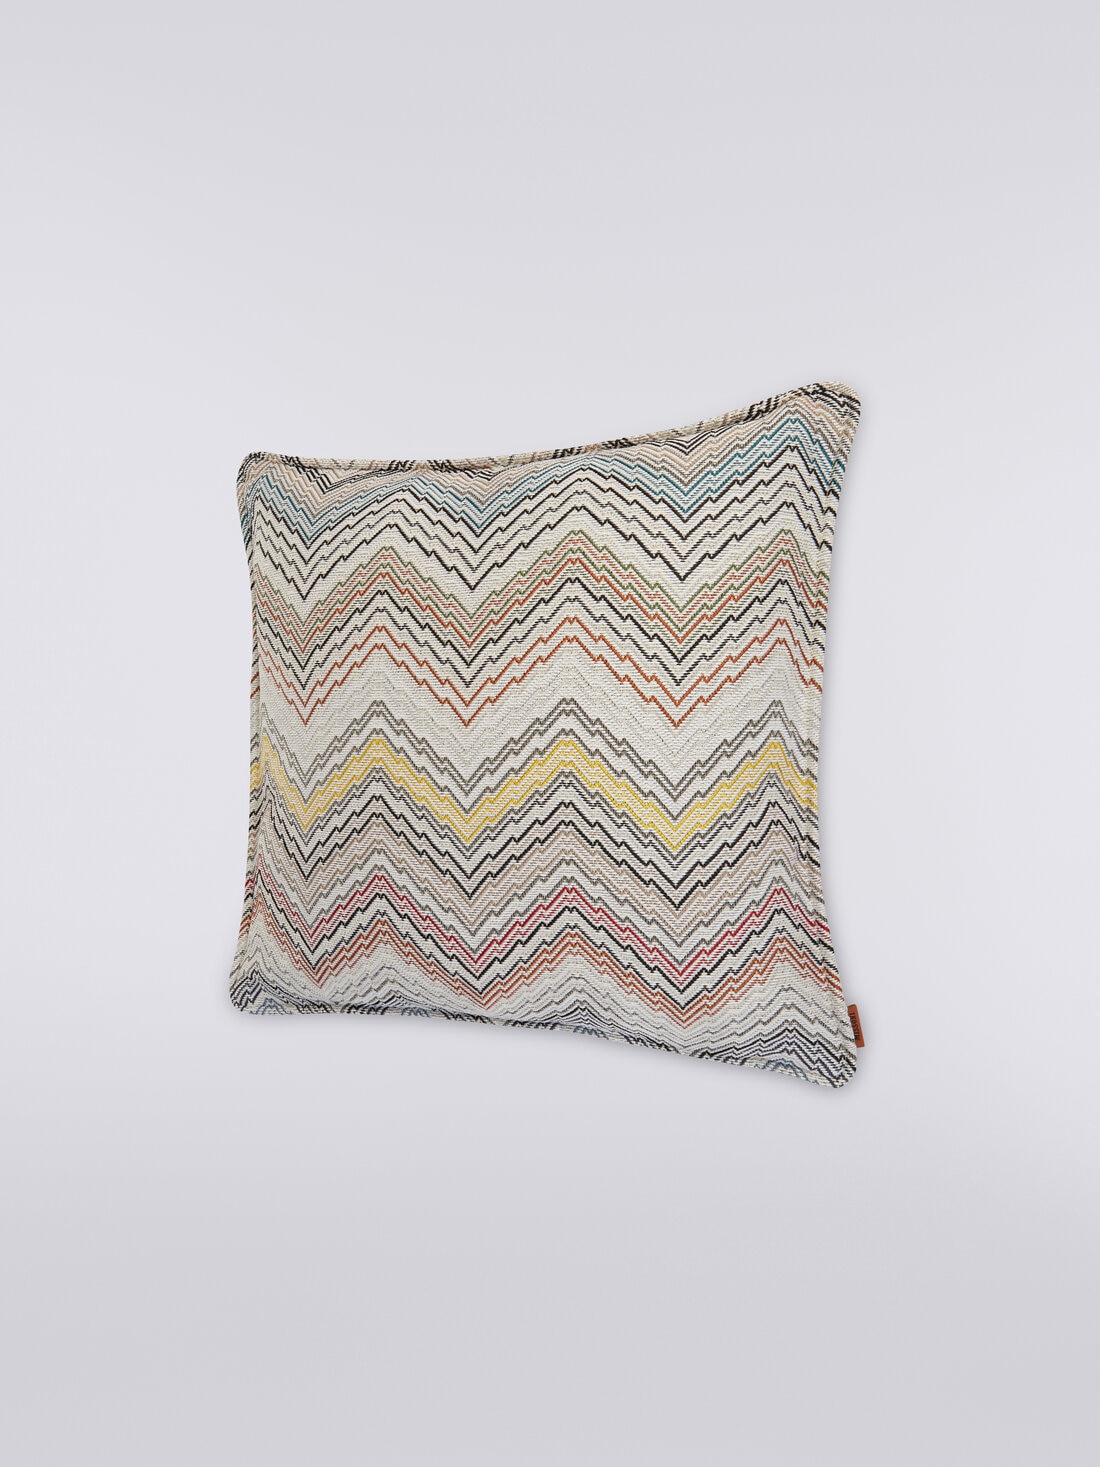 Milano 40x40 cm cushion with knitted effect, White  - 8051575840593 - 1